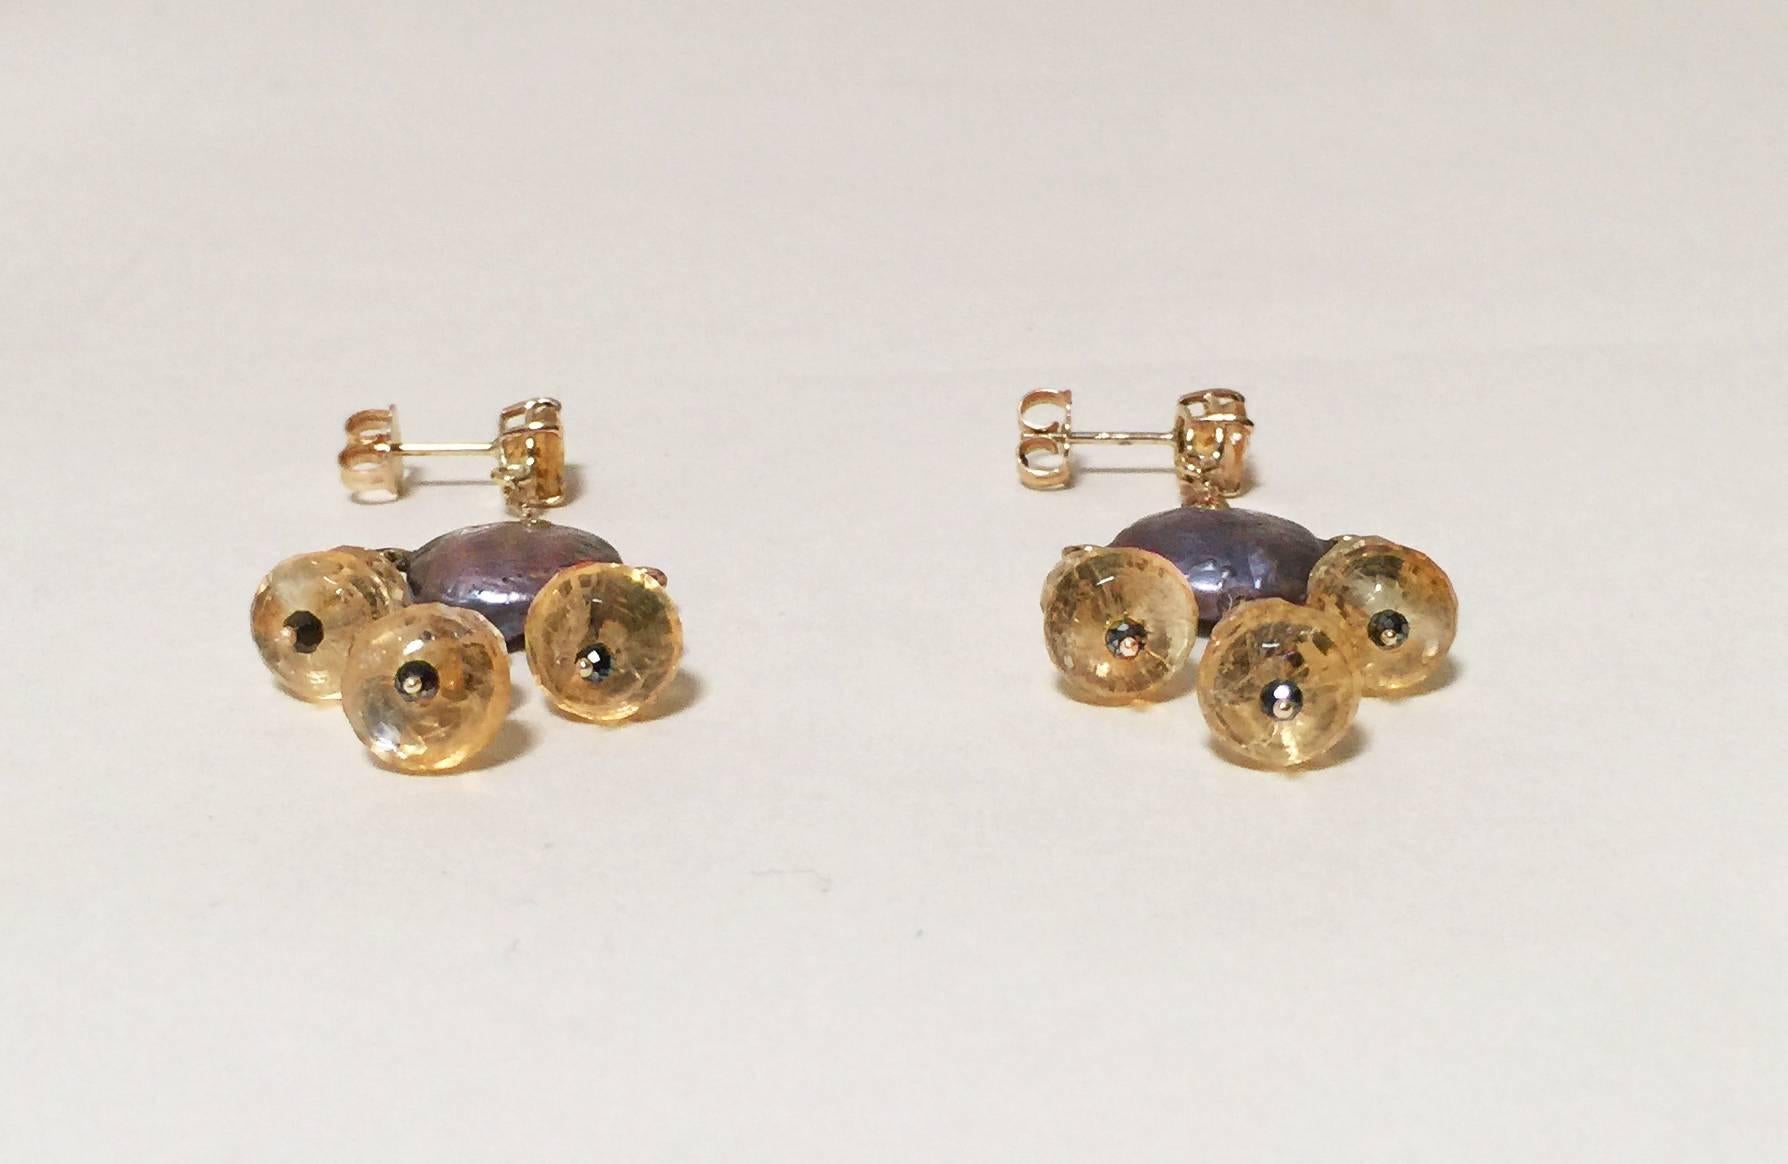 Bead Marina J. Black Pearl Earrings with Spinel and Citrine with 14K Yellow Gold 